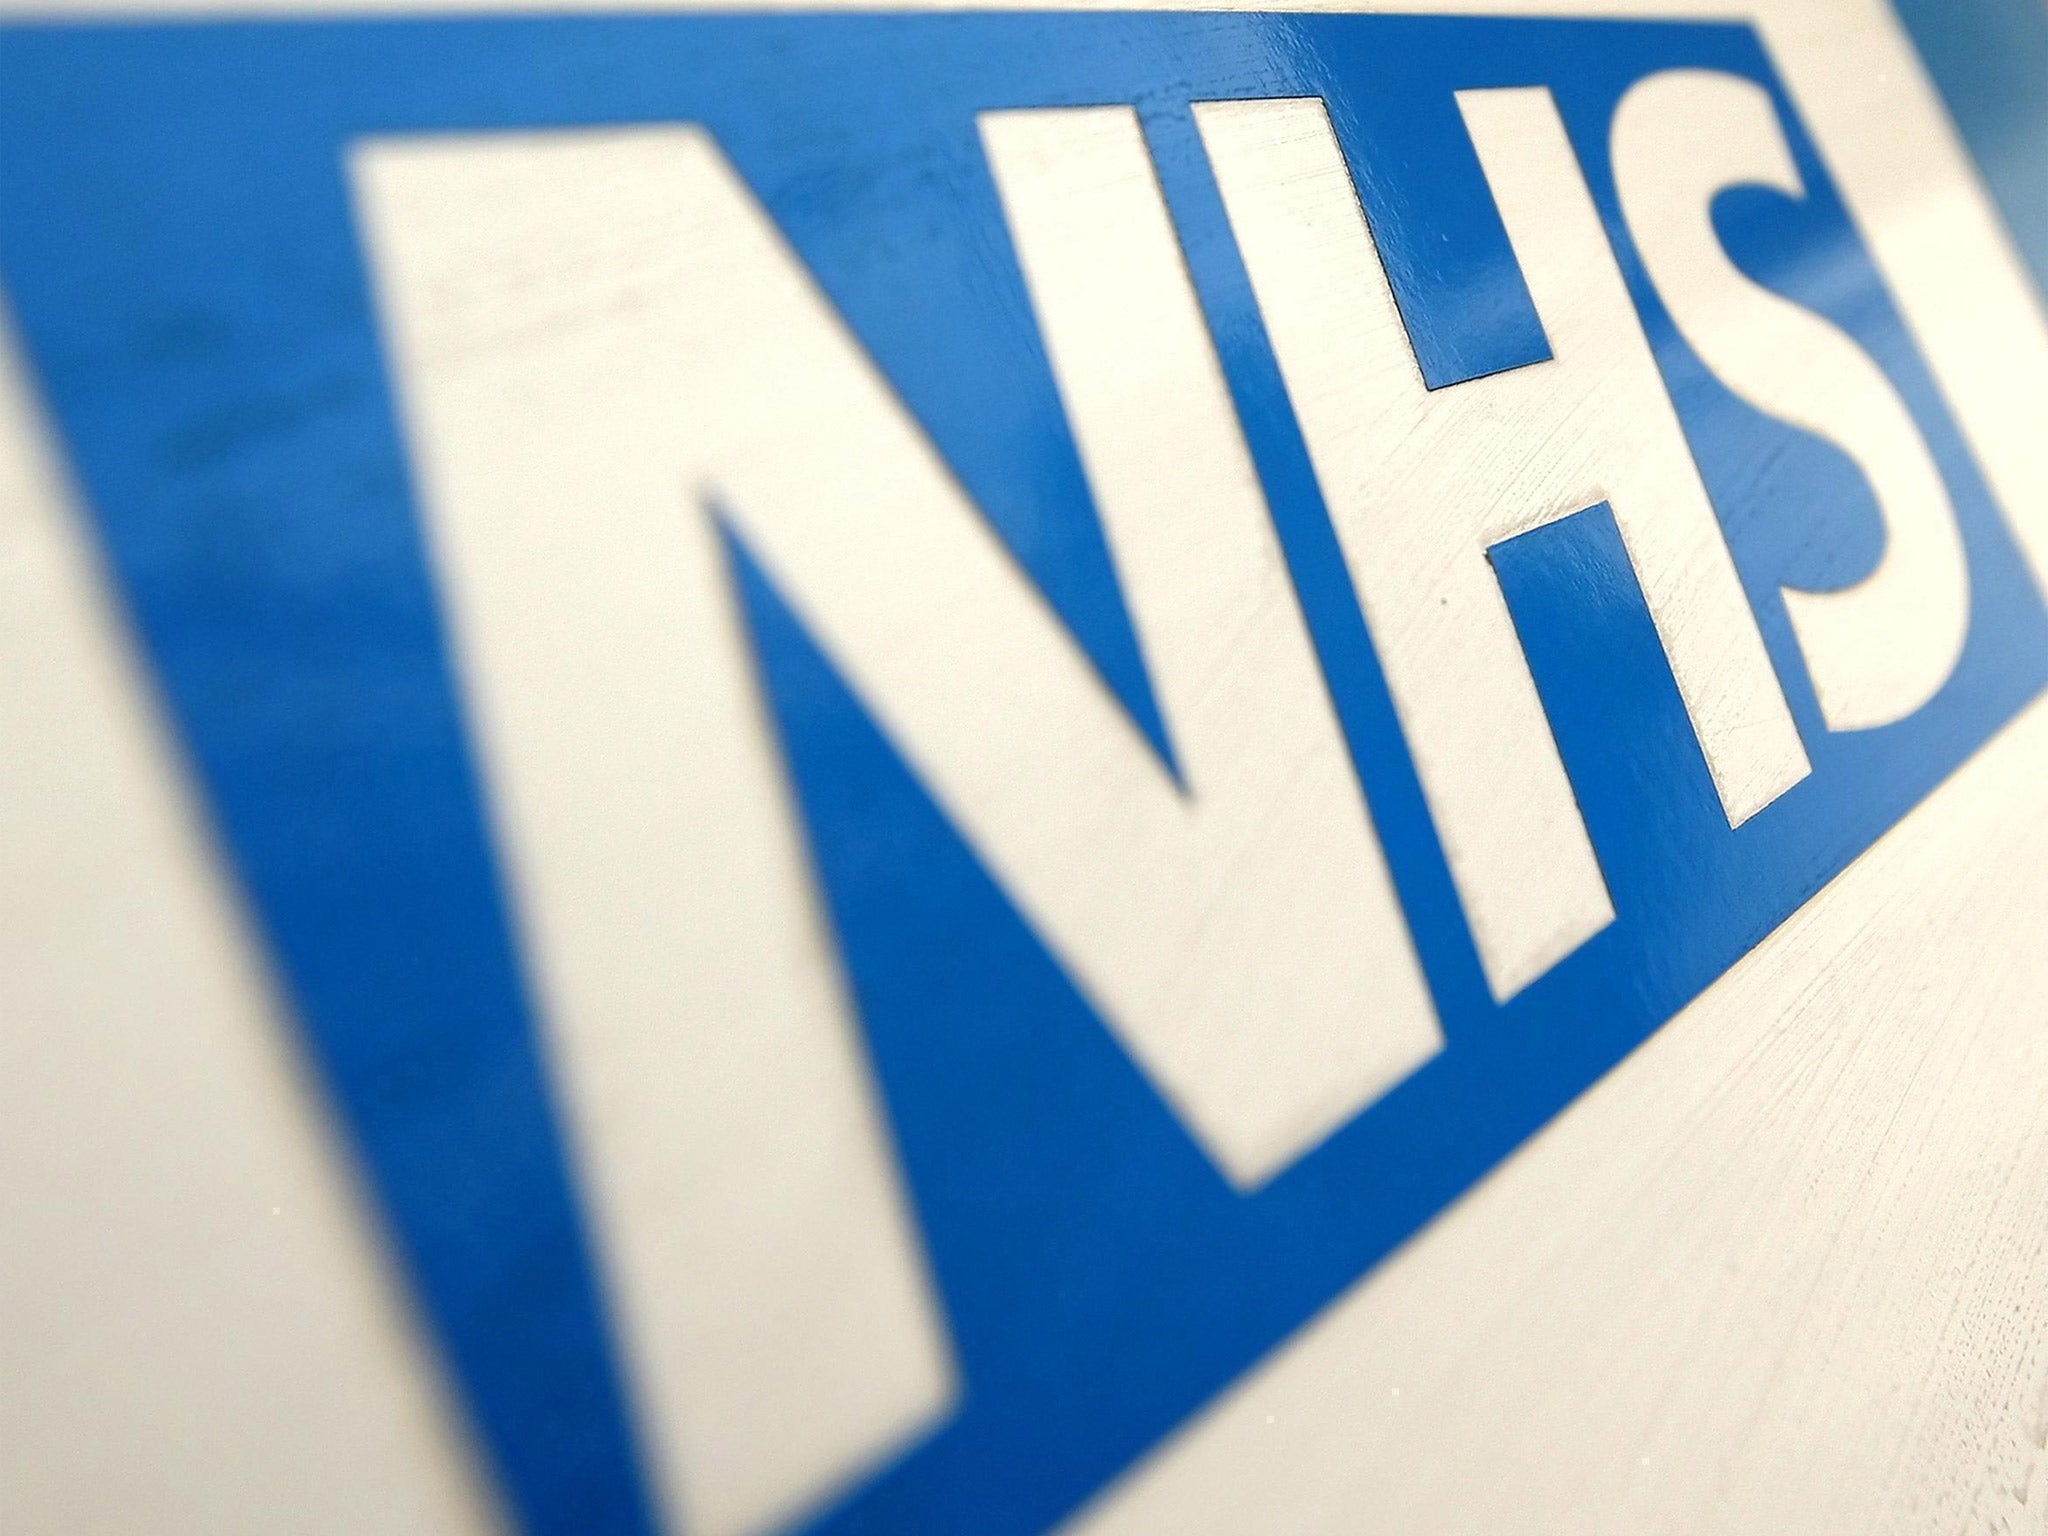 NHS staff have to wait four weeks after redundancy before they can take up a new job